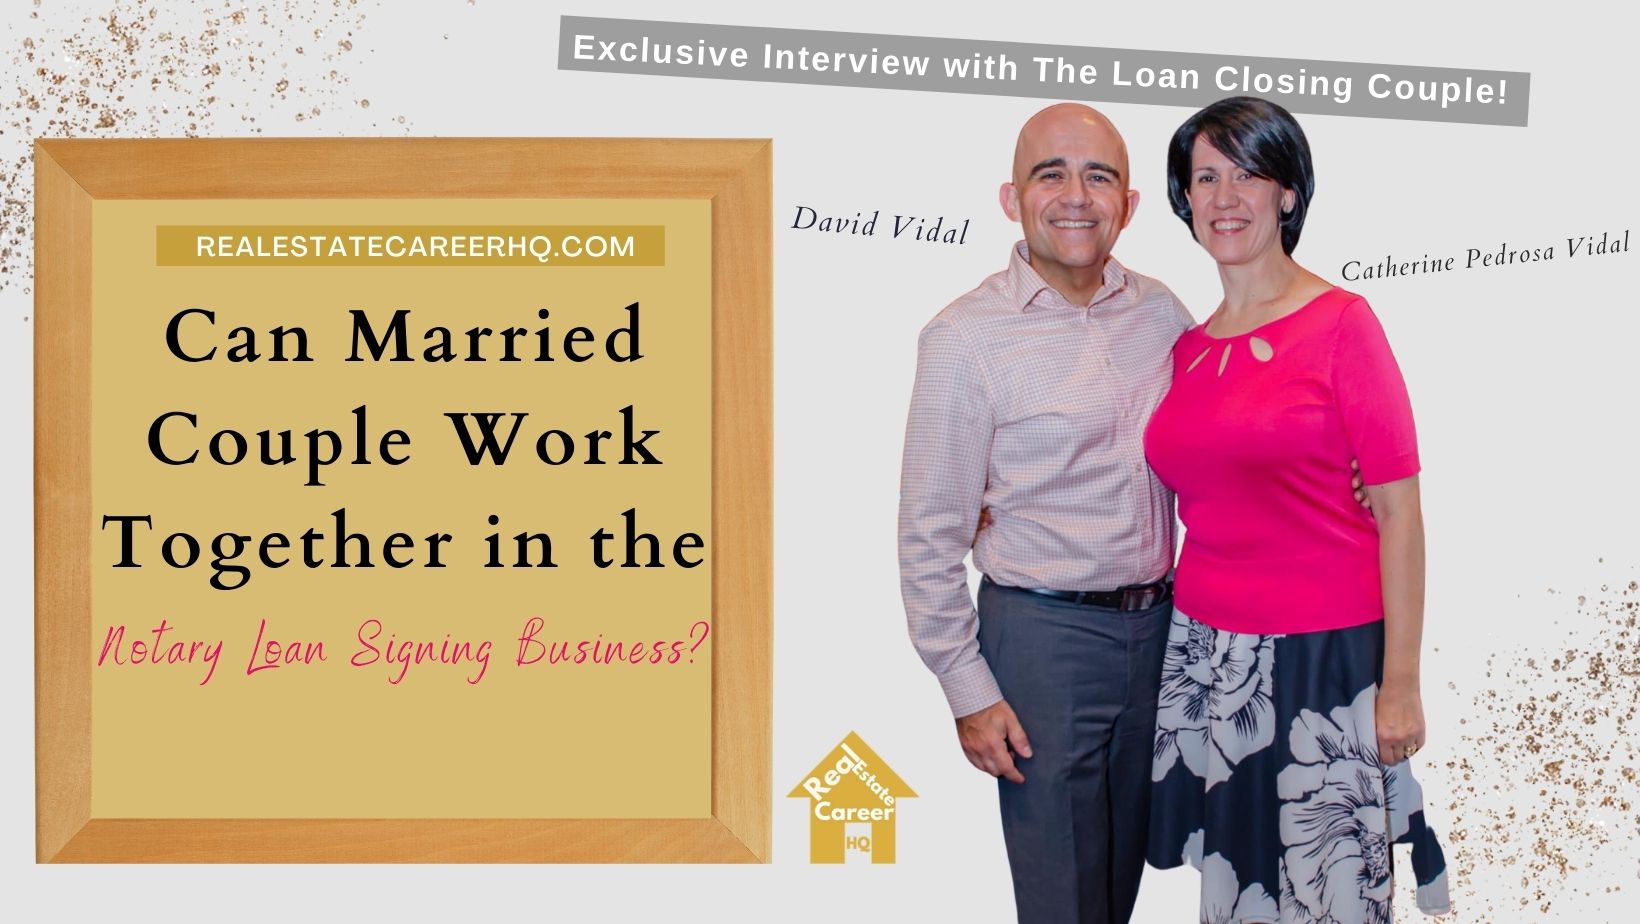 The Loan Closing Couple Interview